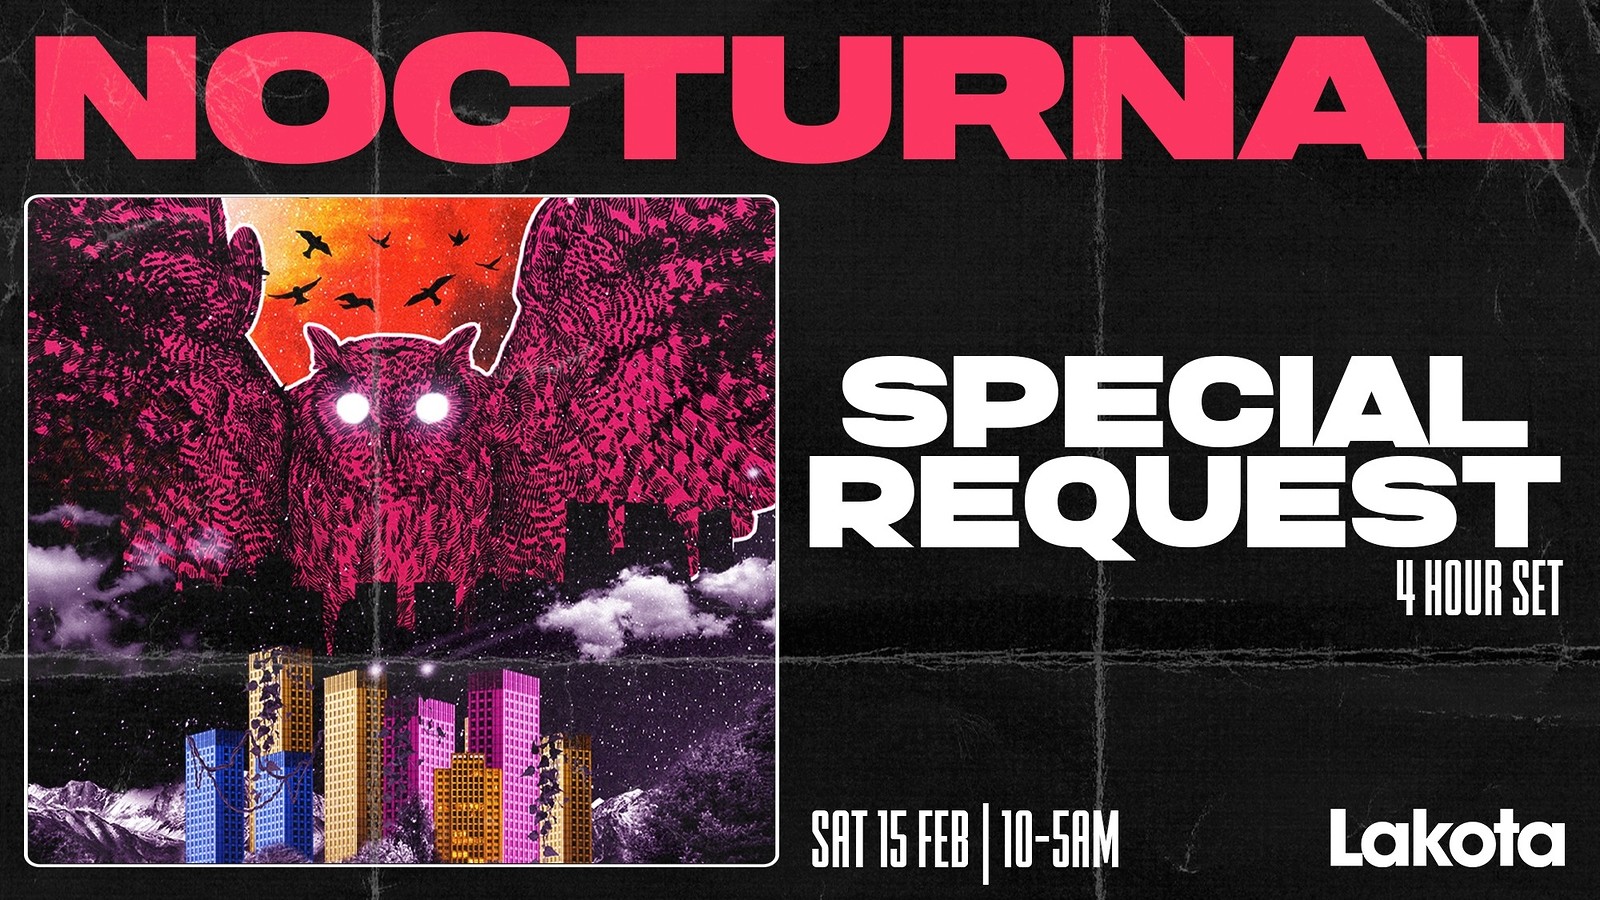 Nocturnal Presents: Special Request at Lakota